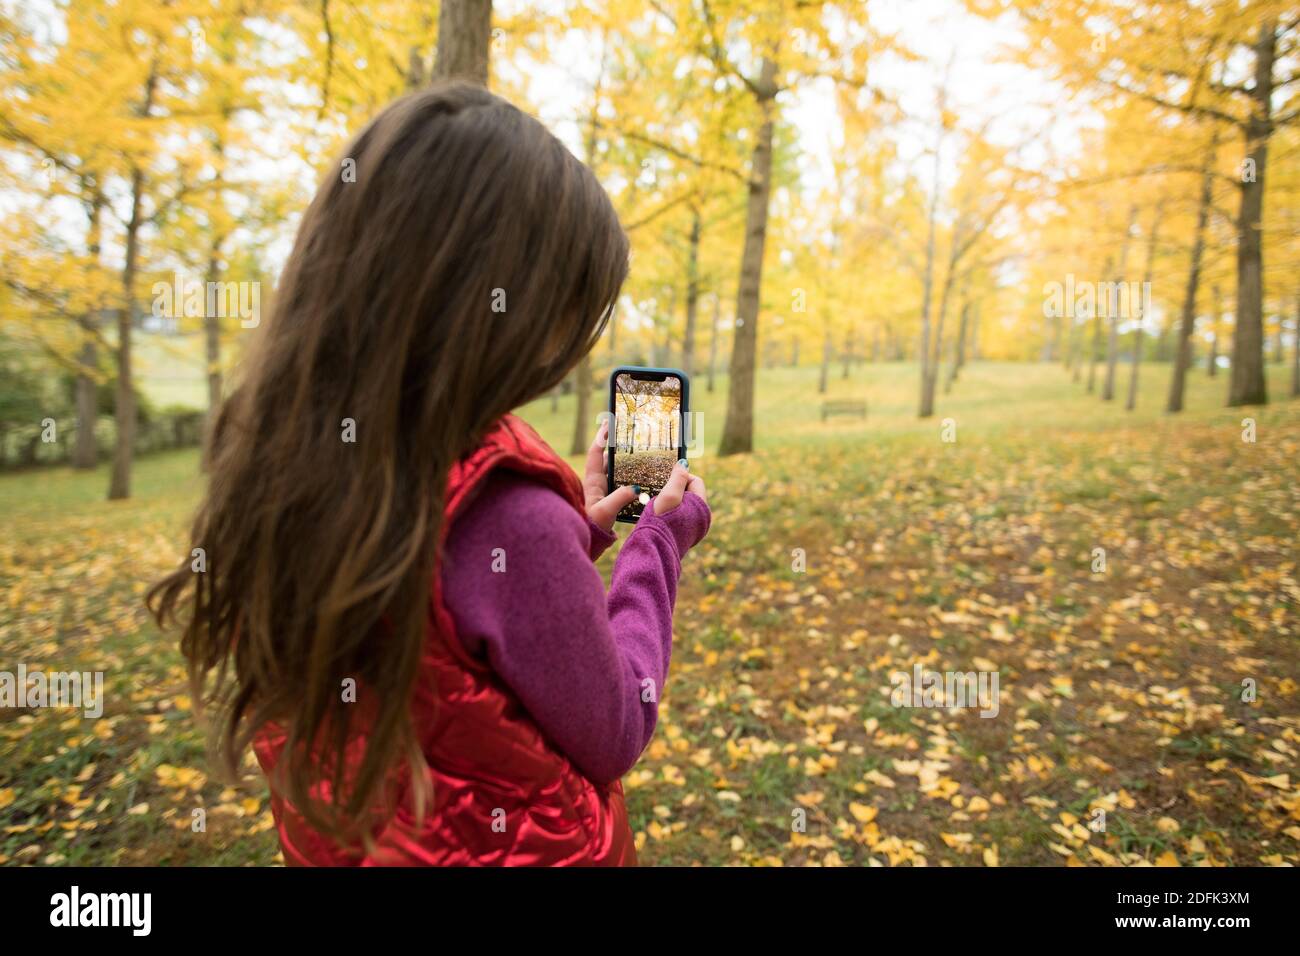 A young girl takes a photo with a smartphone in the ginko tree grove in Blandy National Arboretum, University of Virginia. Stock Photo